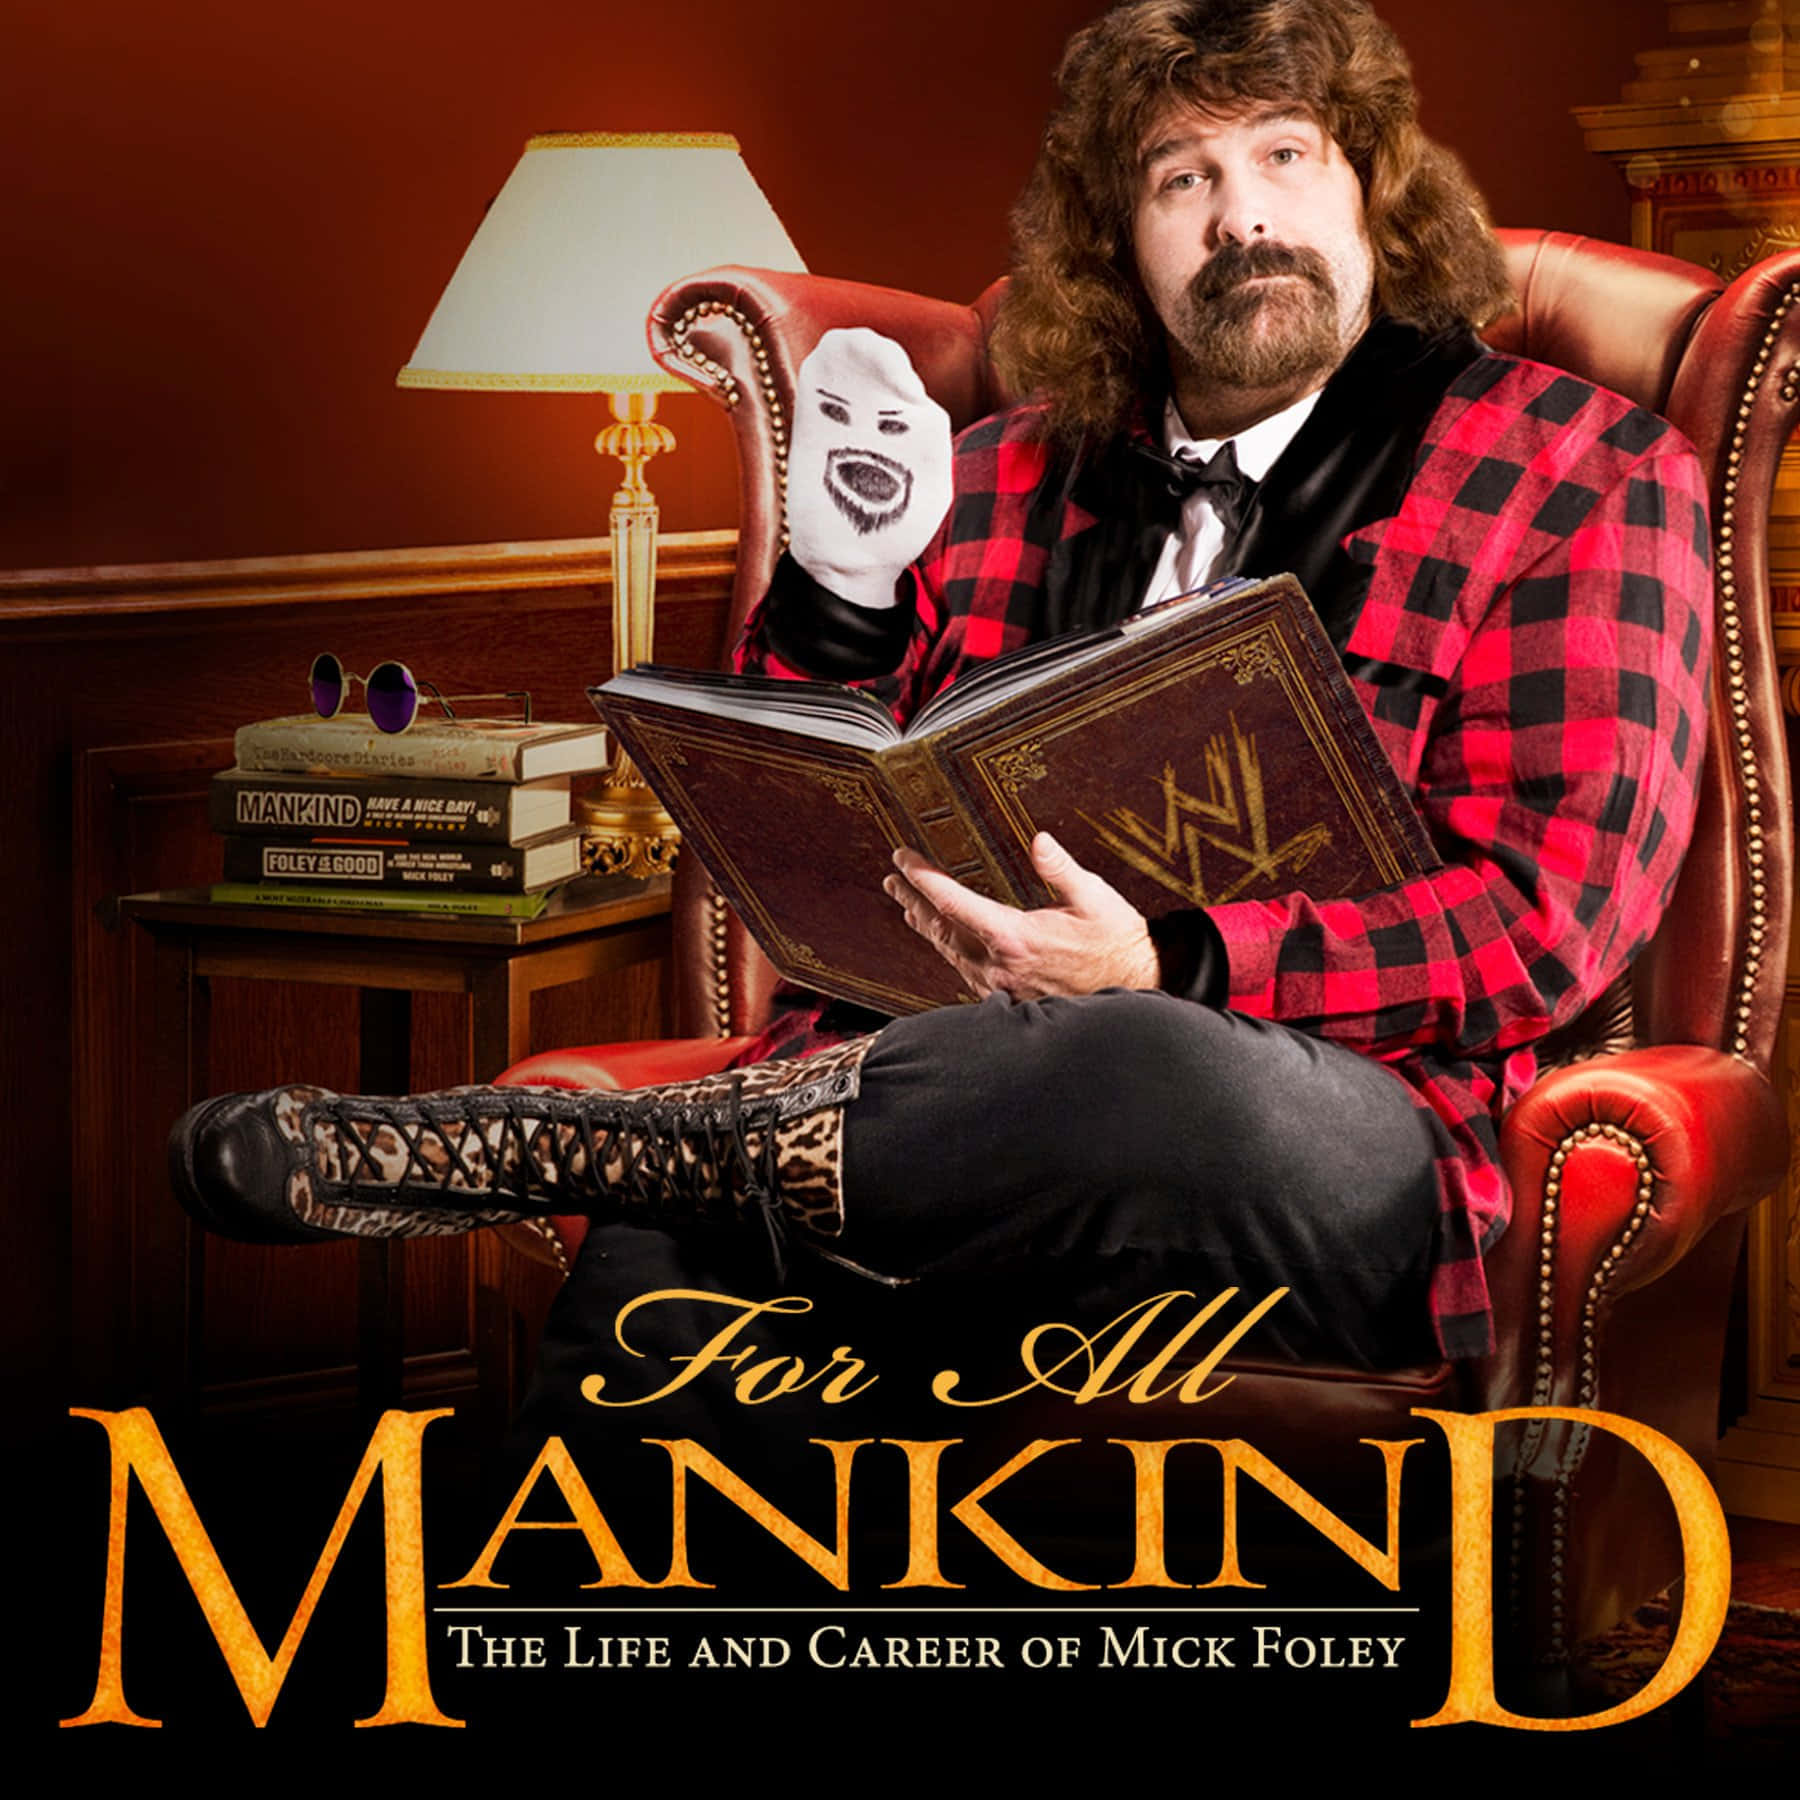 WWE Legend Mick Foley in "For All Mankind" DVD Cover Wallpaper